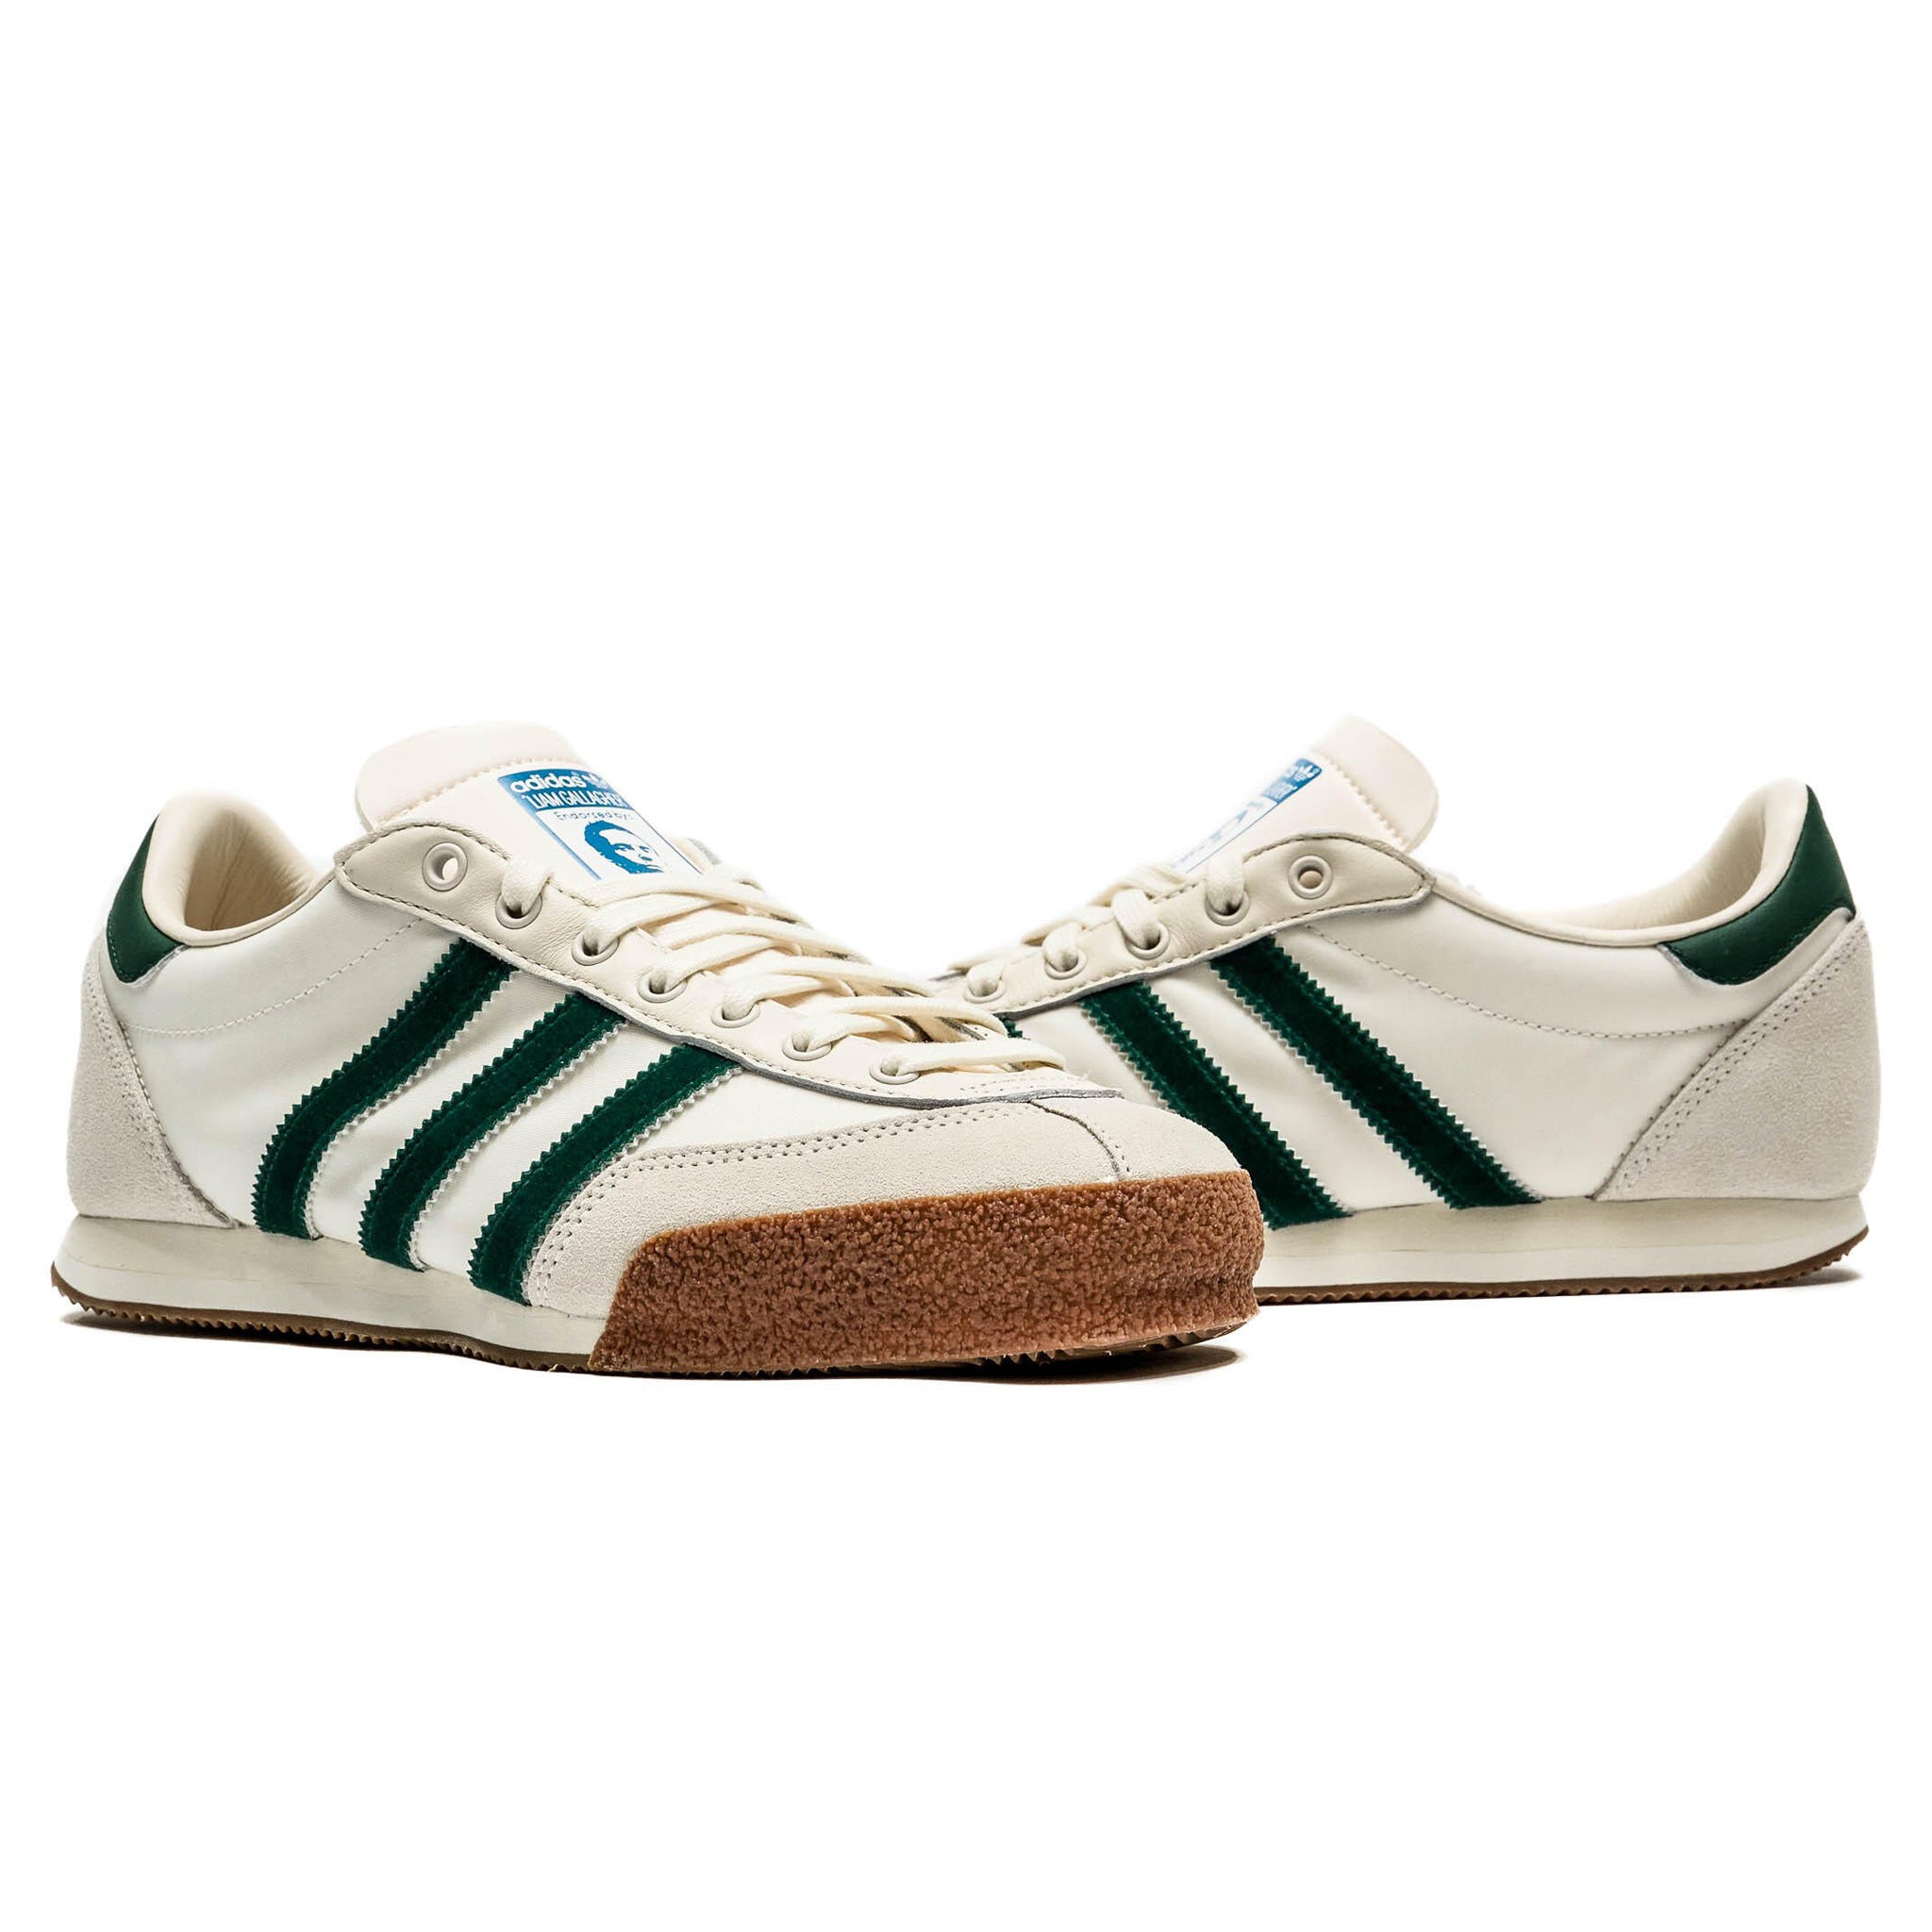 Back side View of Liam Gallagher x Adidas Spezial LG2 Bottle Green IF8358